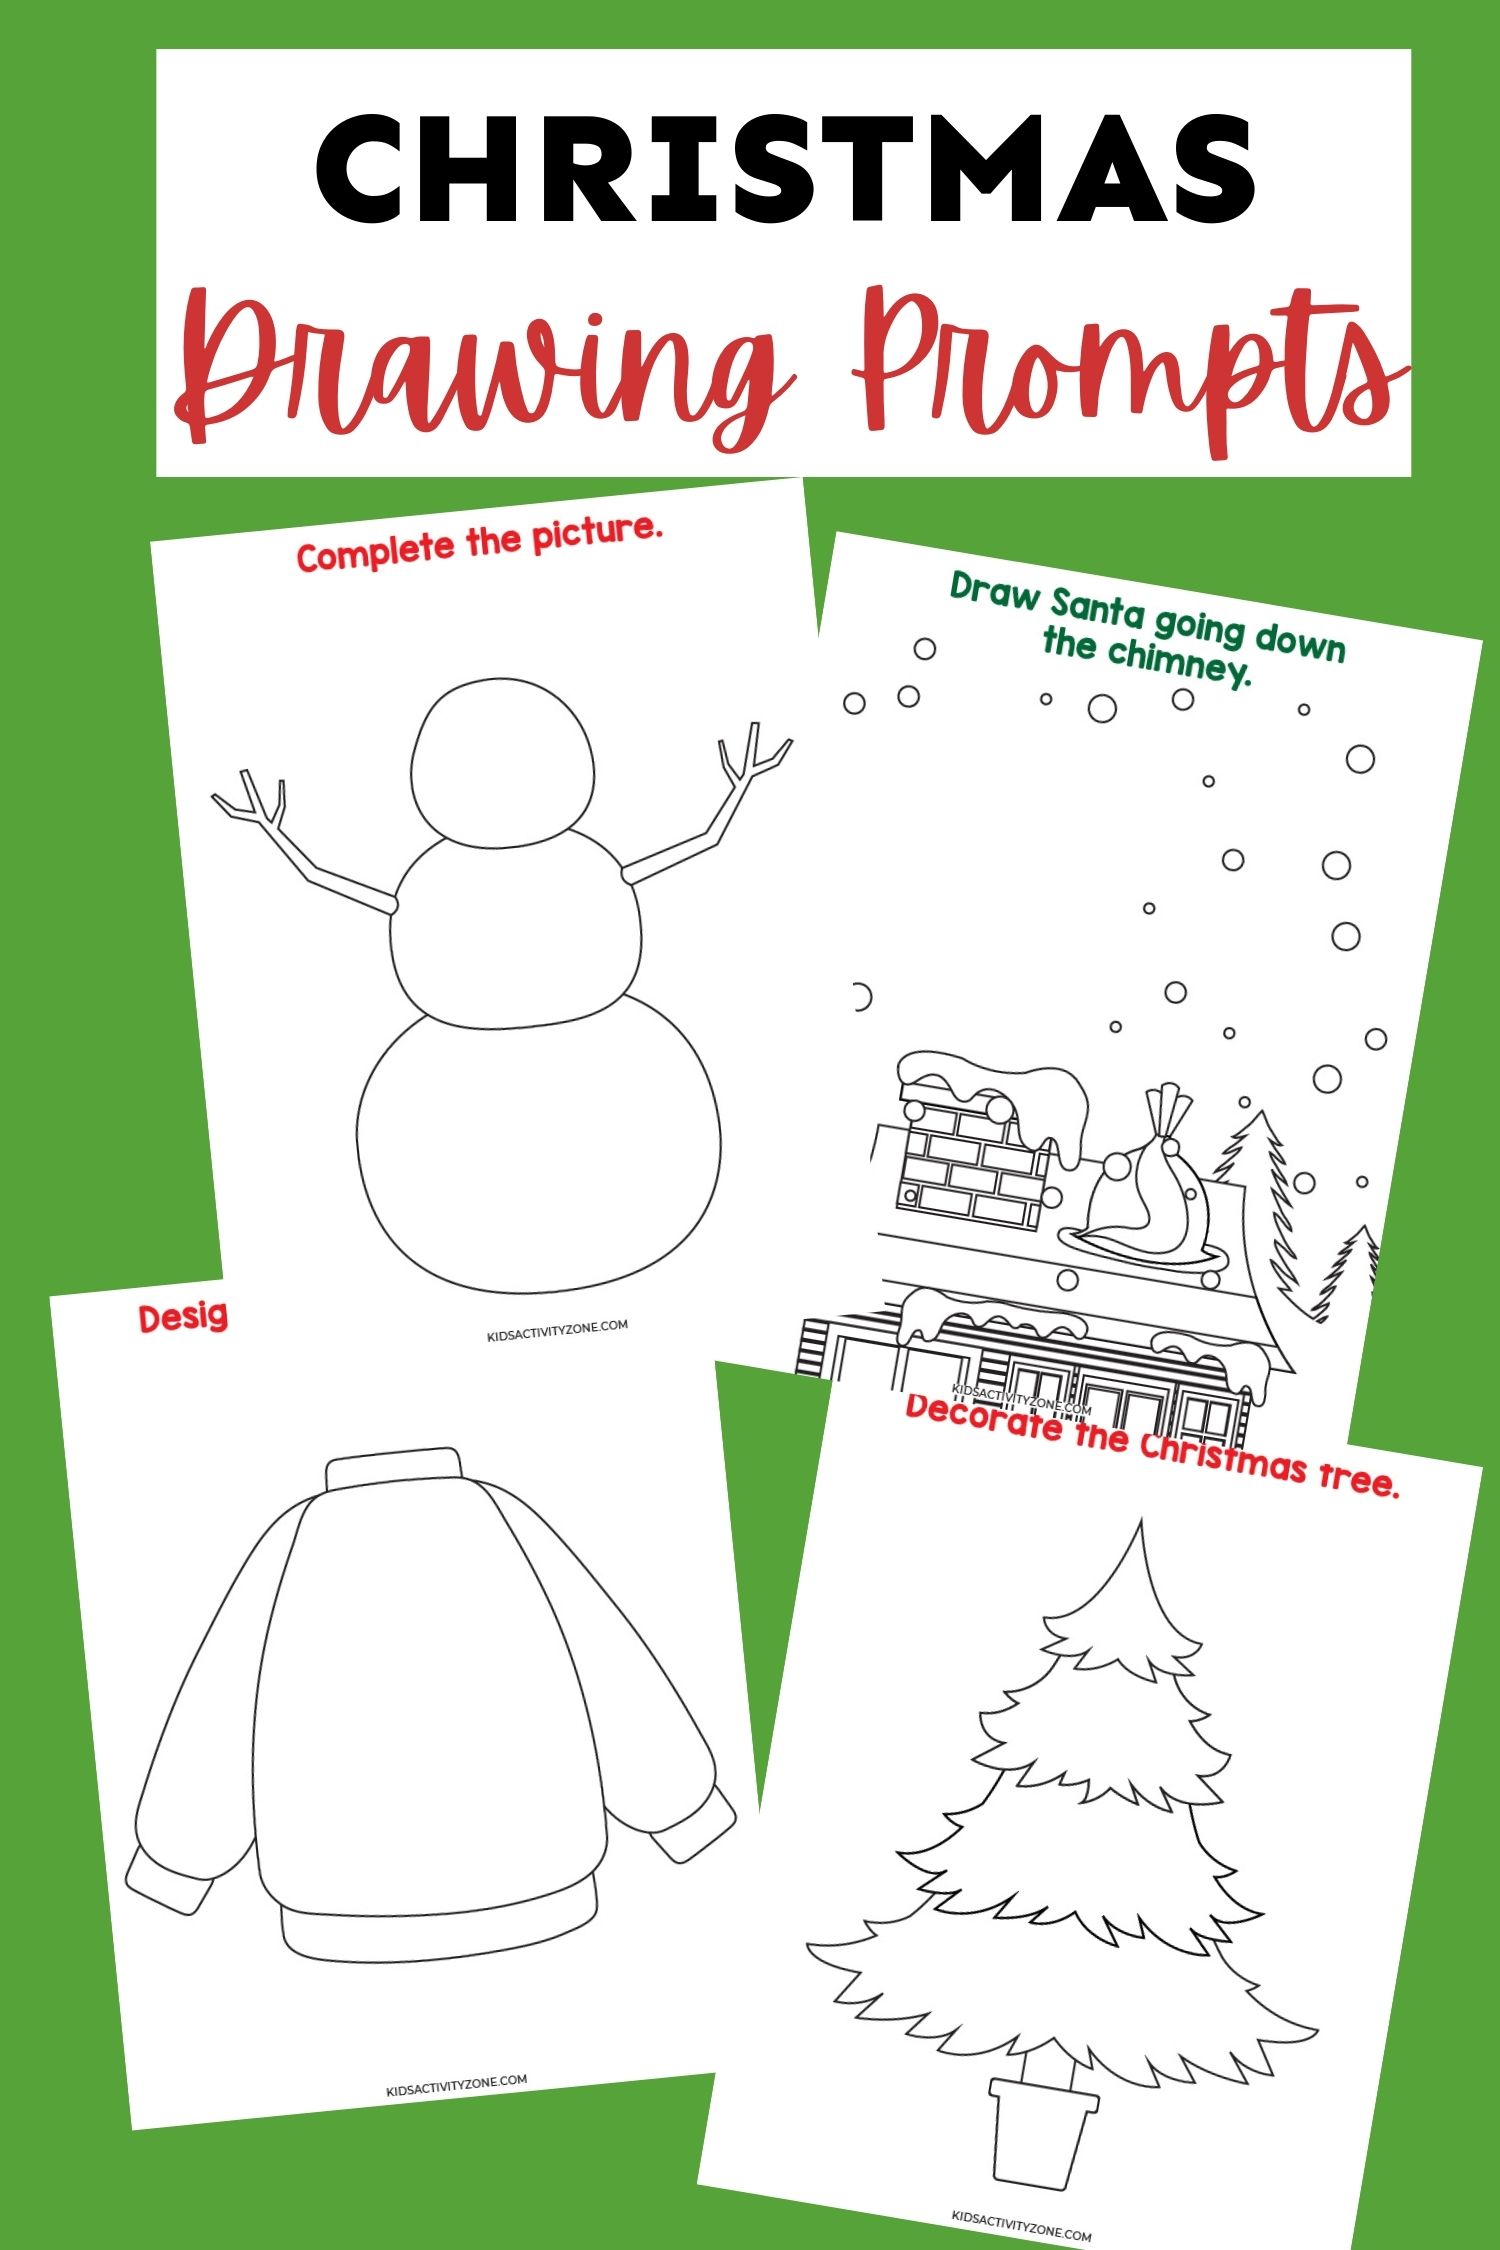 58 Christmas and Winter Drawing Ideas: Easy Drawing Tutorials-saigonsouth.com.vn